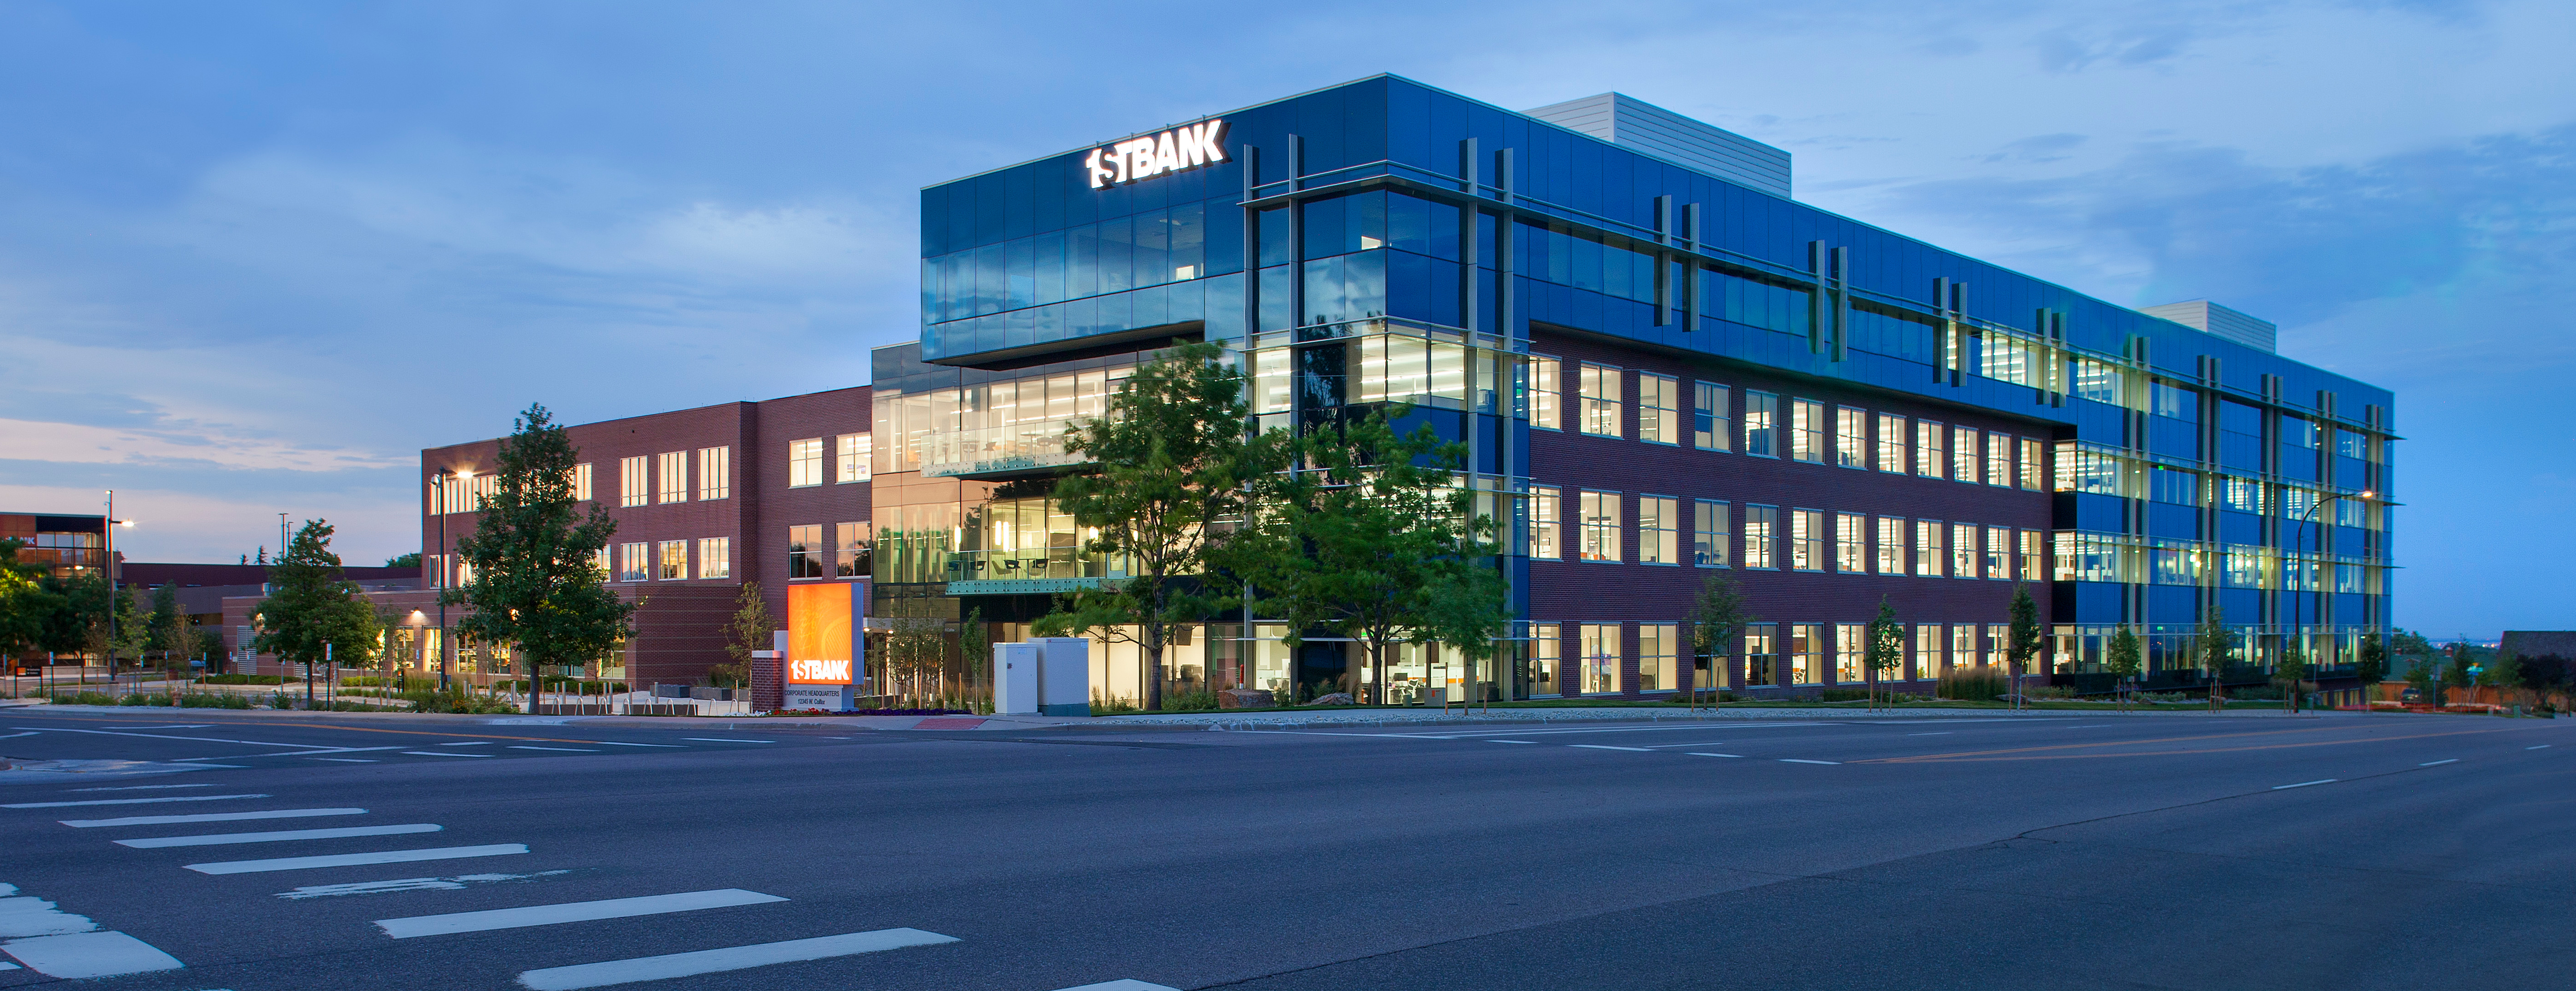 Exterior photo of FirstBank’s corporate headquarters at dusk. 